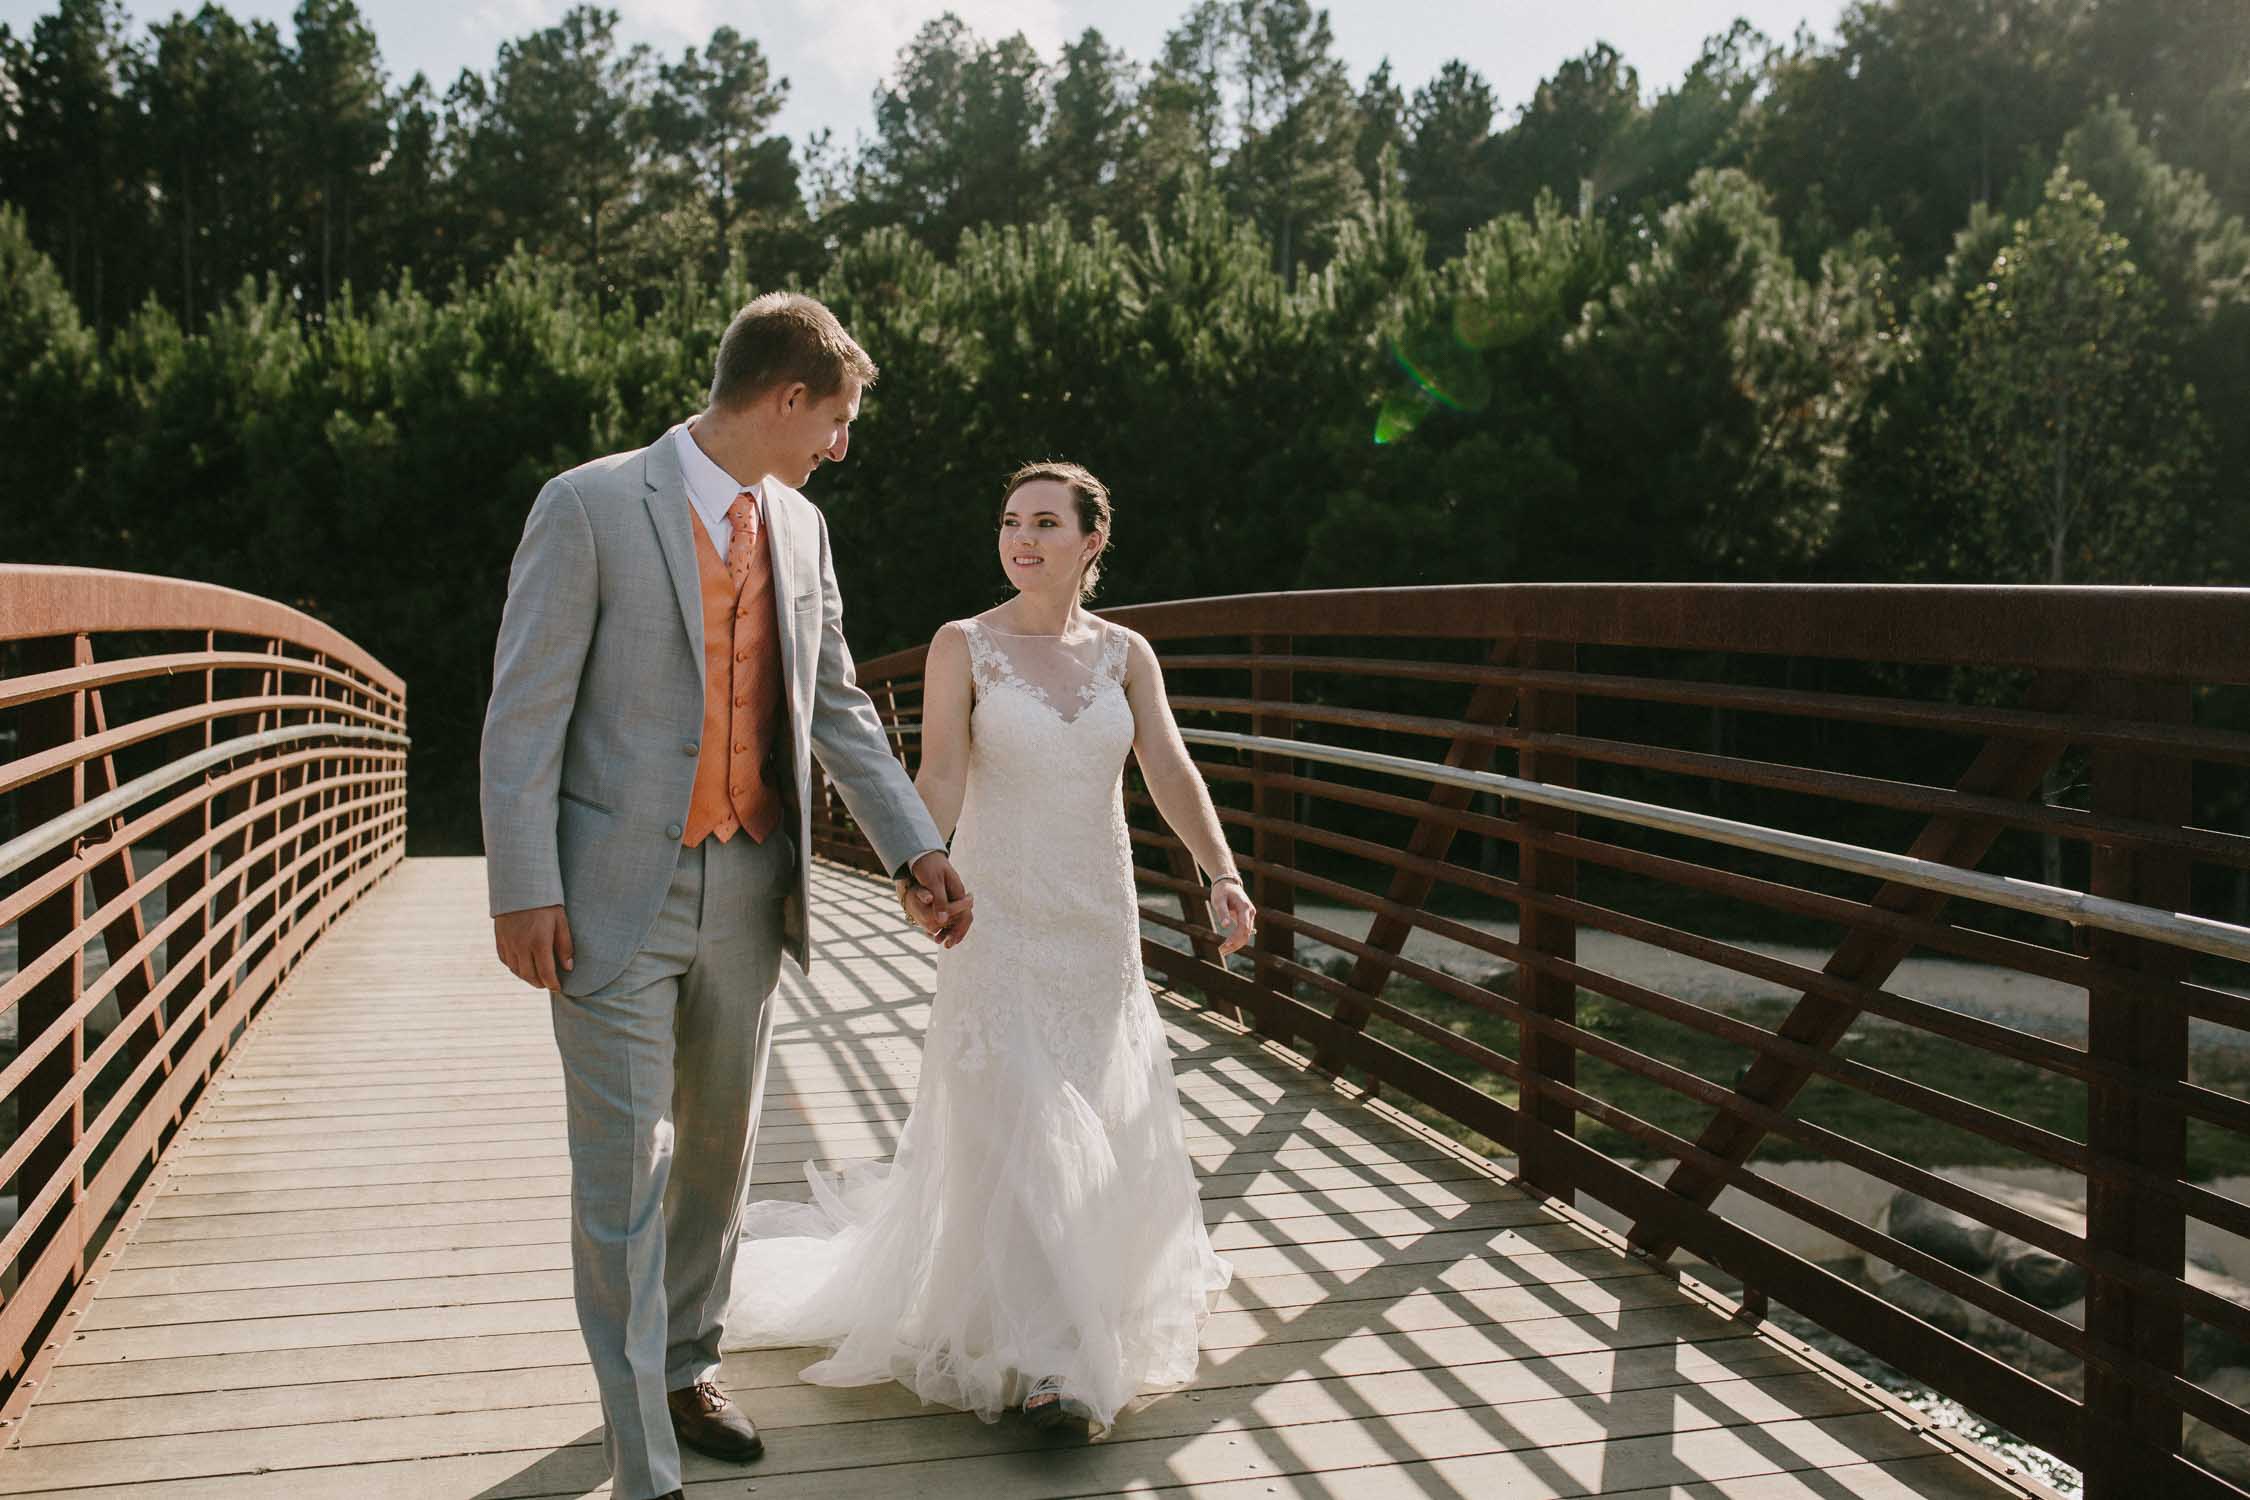 A groom in light grey and bride in white look at each other while walking toward us over a wooden bridge.